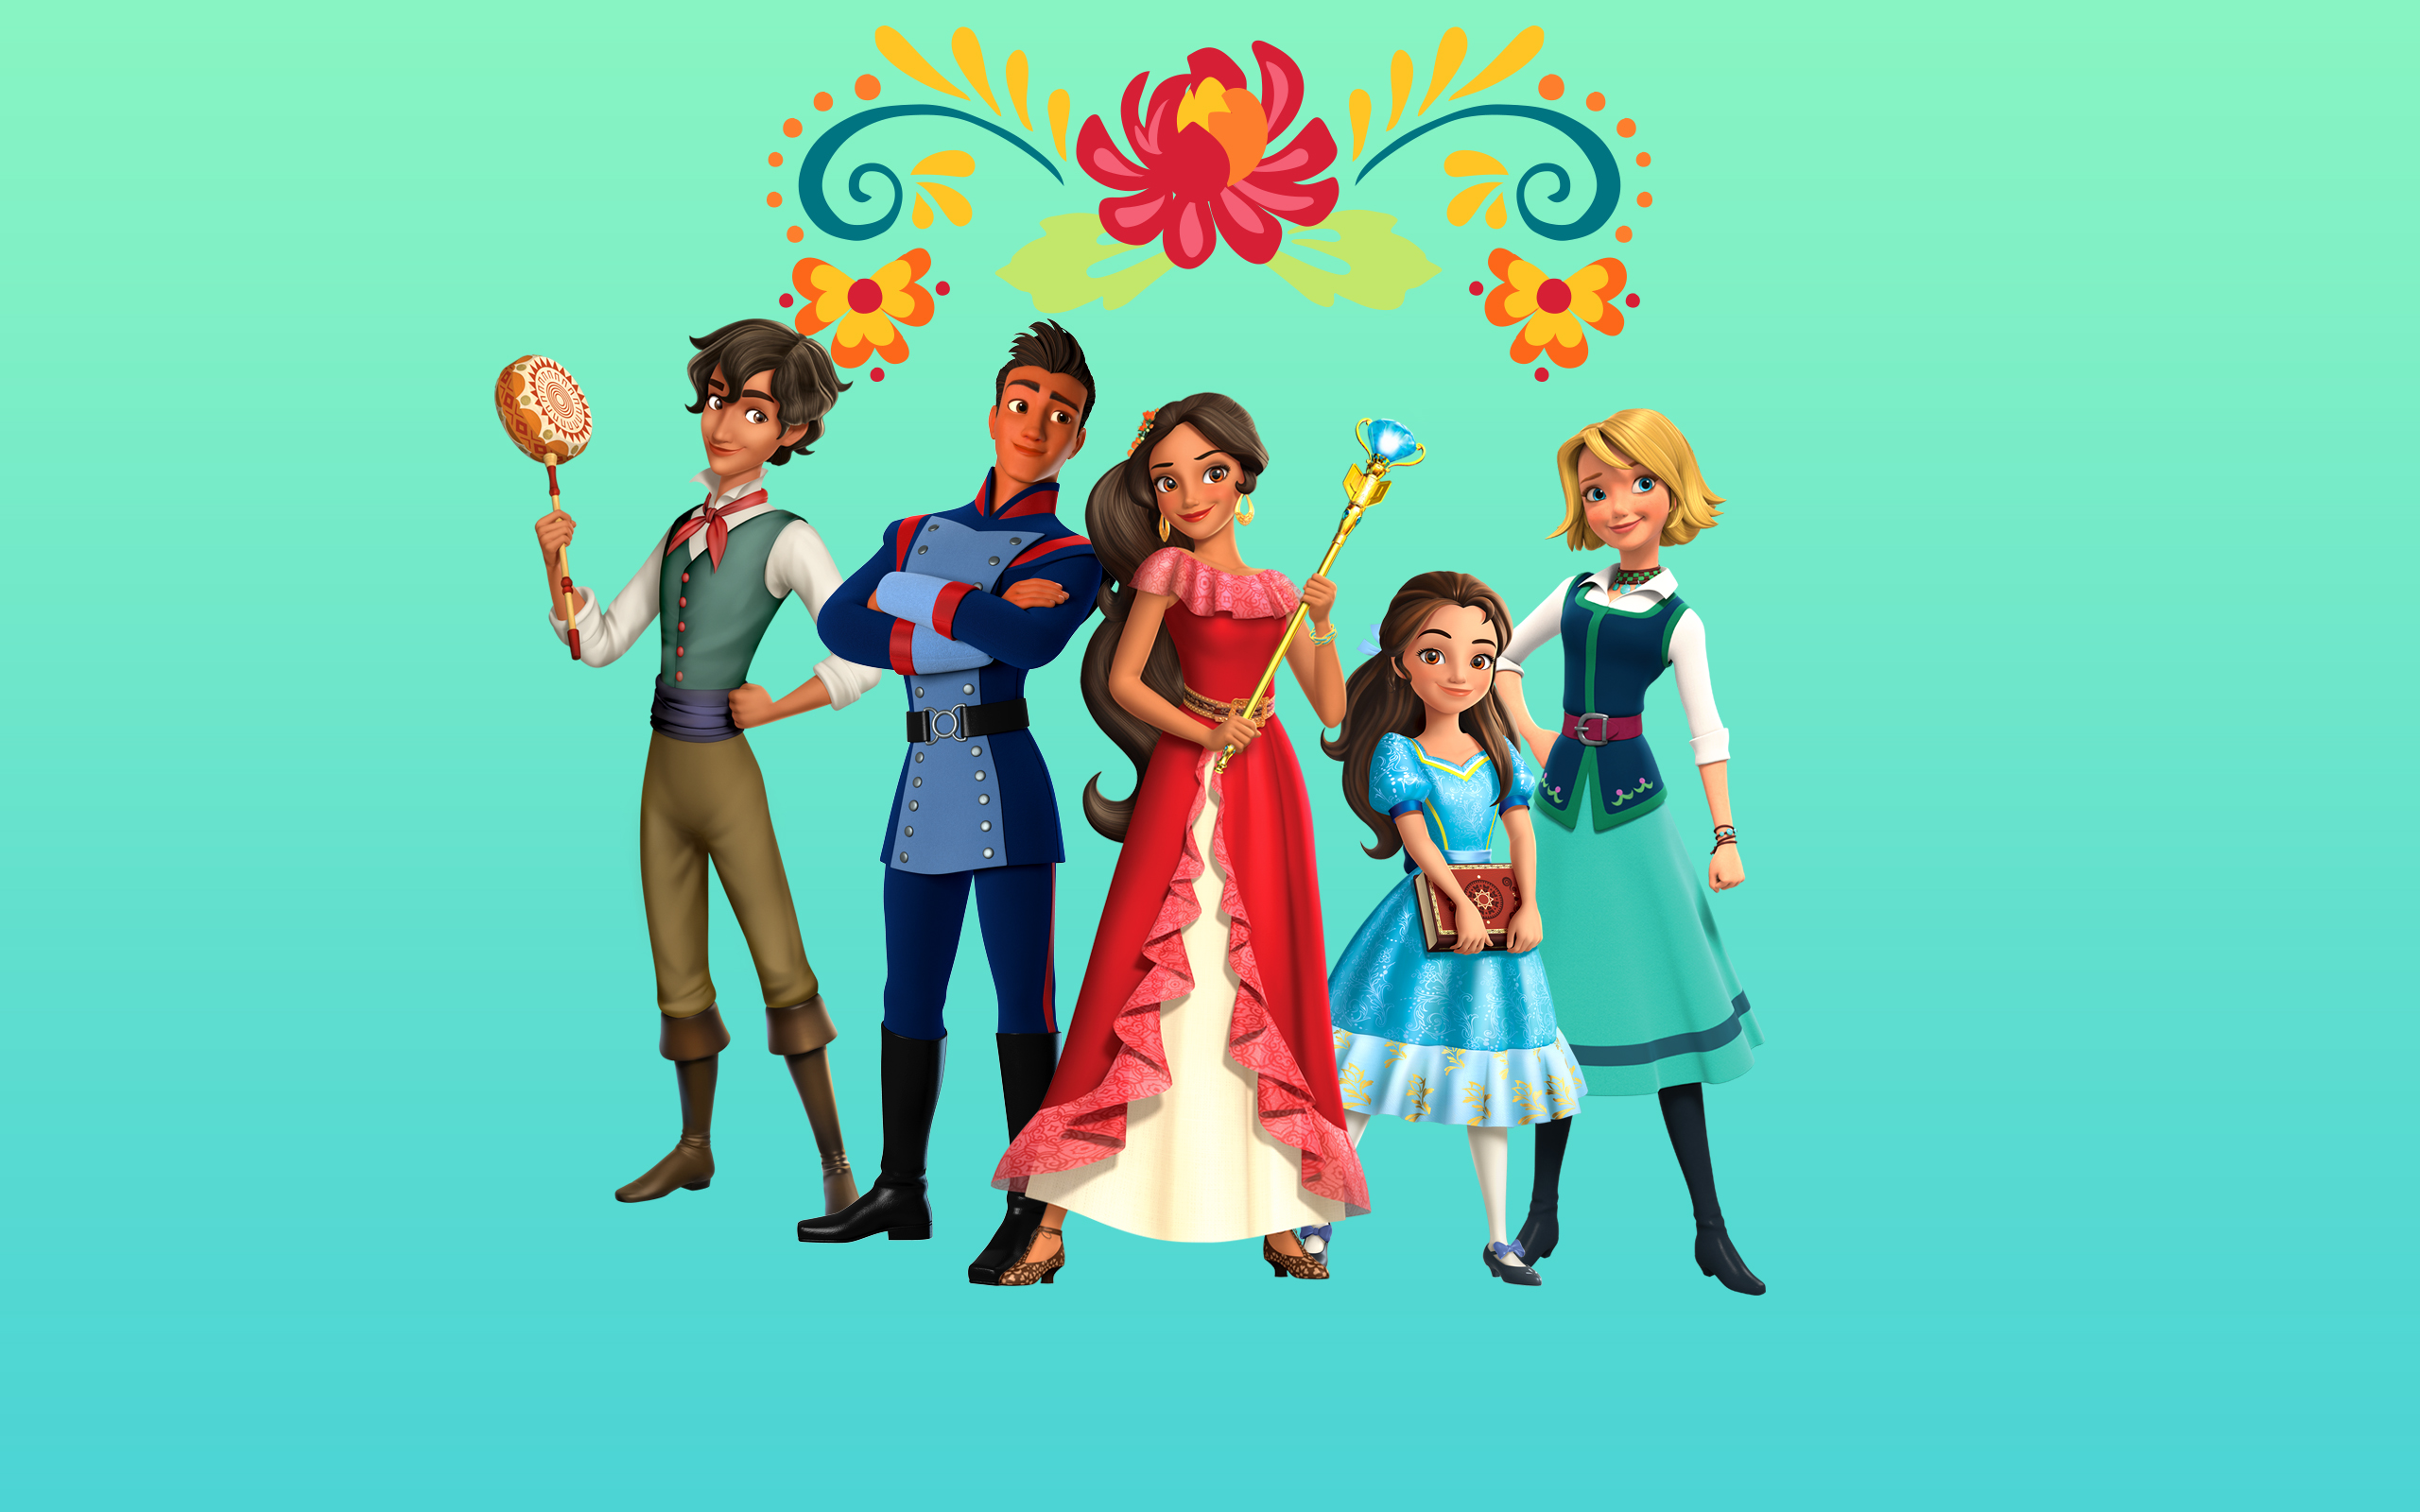 Elena of Avalor: Big wallpapers with main characters.